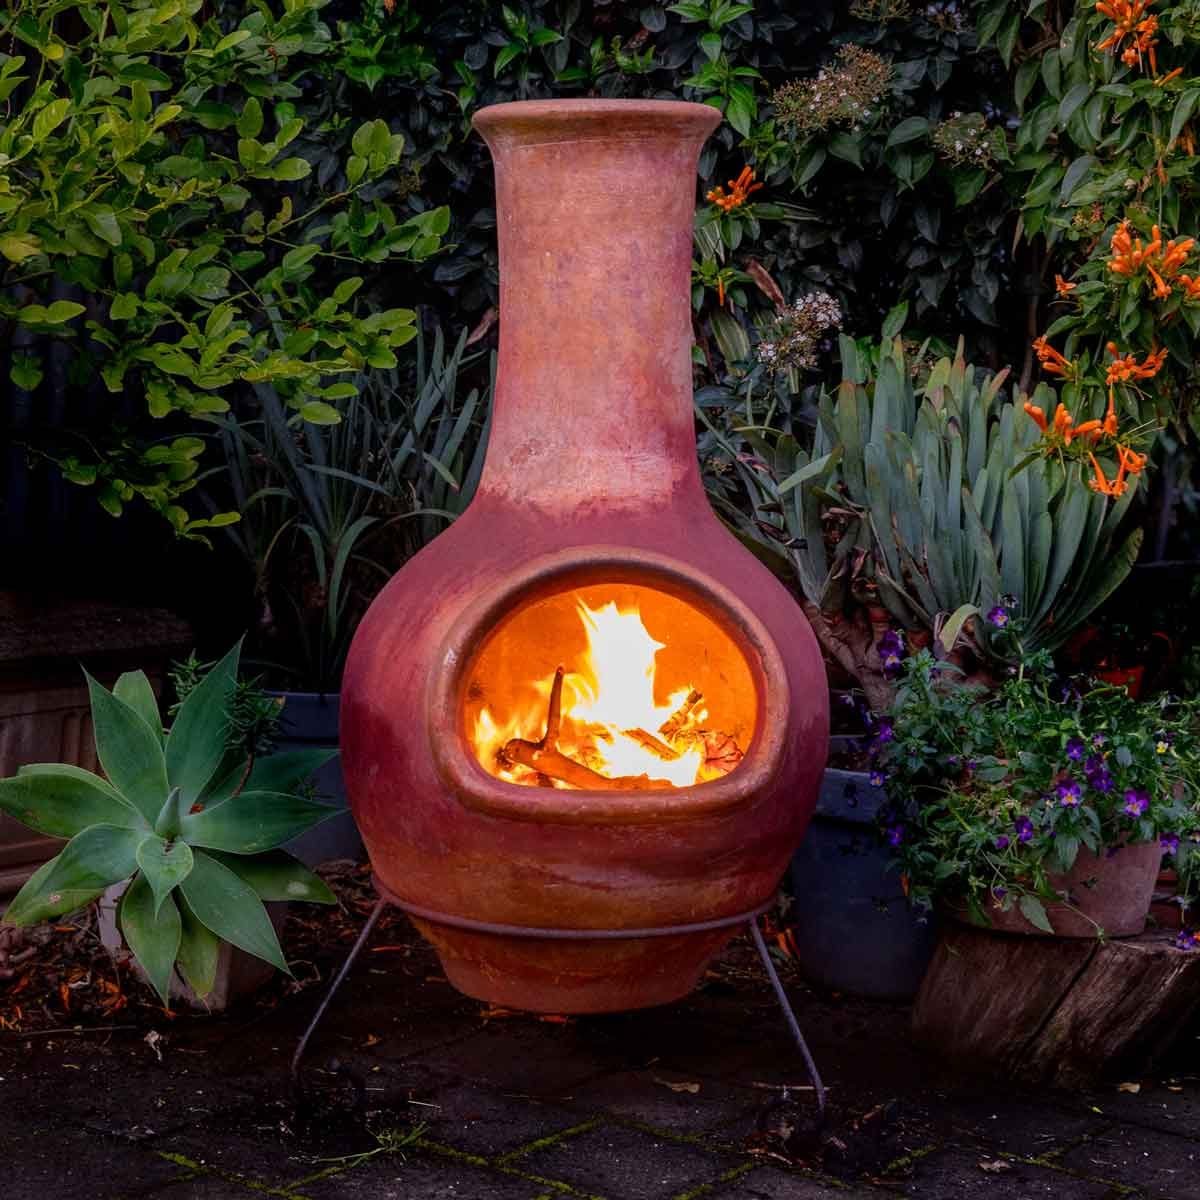 What to Know About Chimineas | The Family Handyman